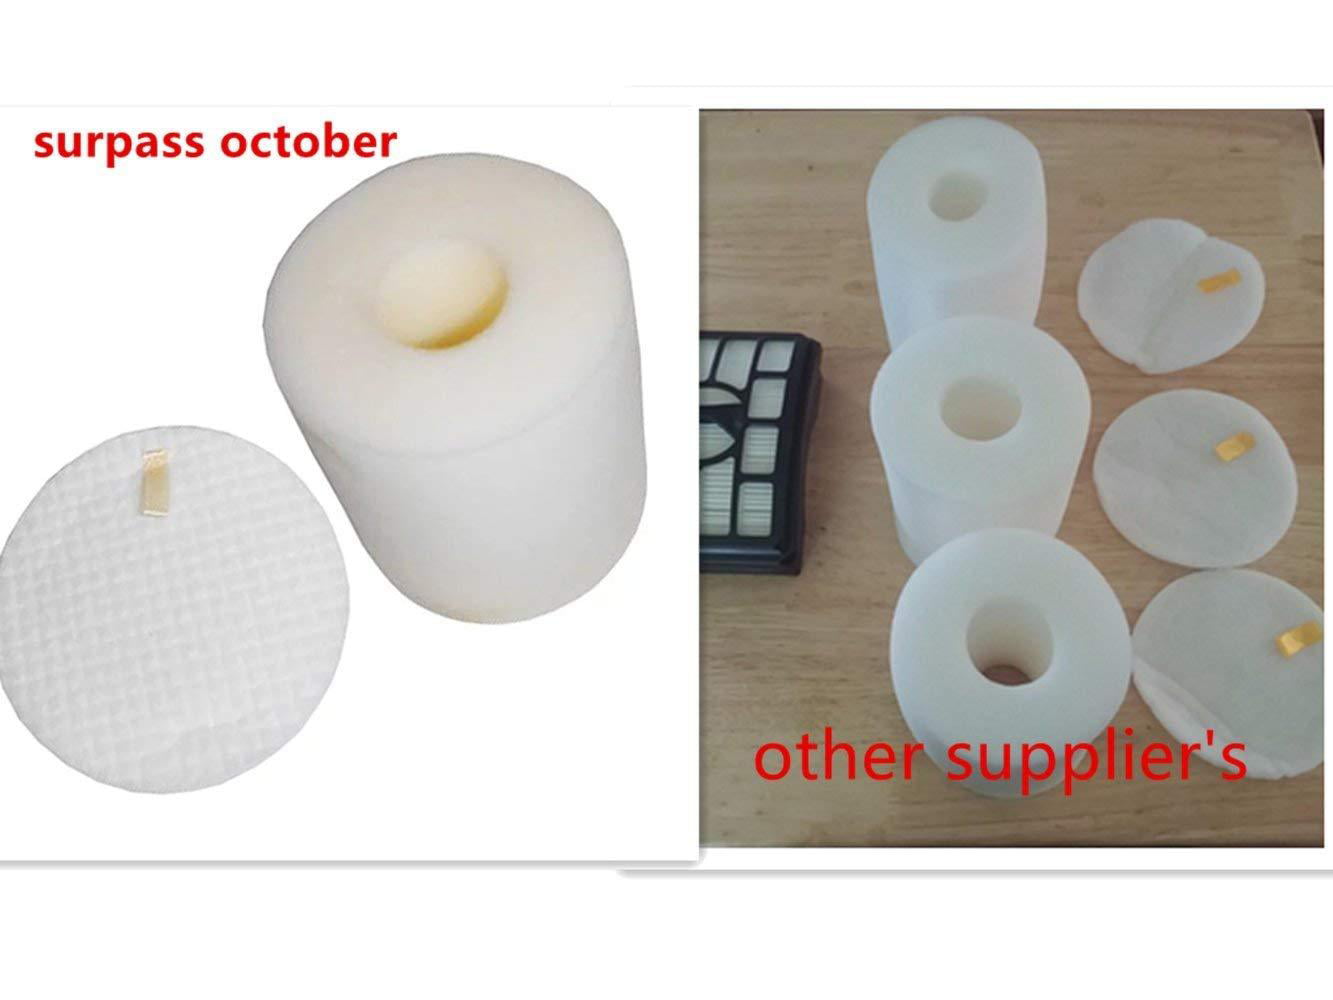 Replaces Part Numbers XFF500/XHF500 UV560 Includes 2 HEPA Filter 6 Foam Filters NV552 EFP HEPA Filter Kit for Shark Rotator Pro Lift Away Vacuum Cleaner Models NV500 